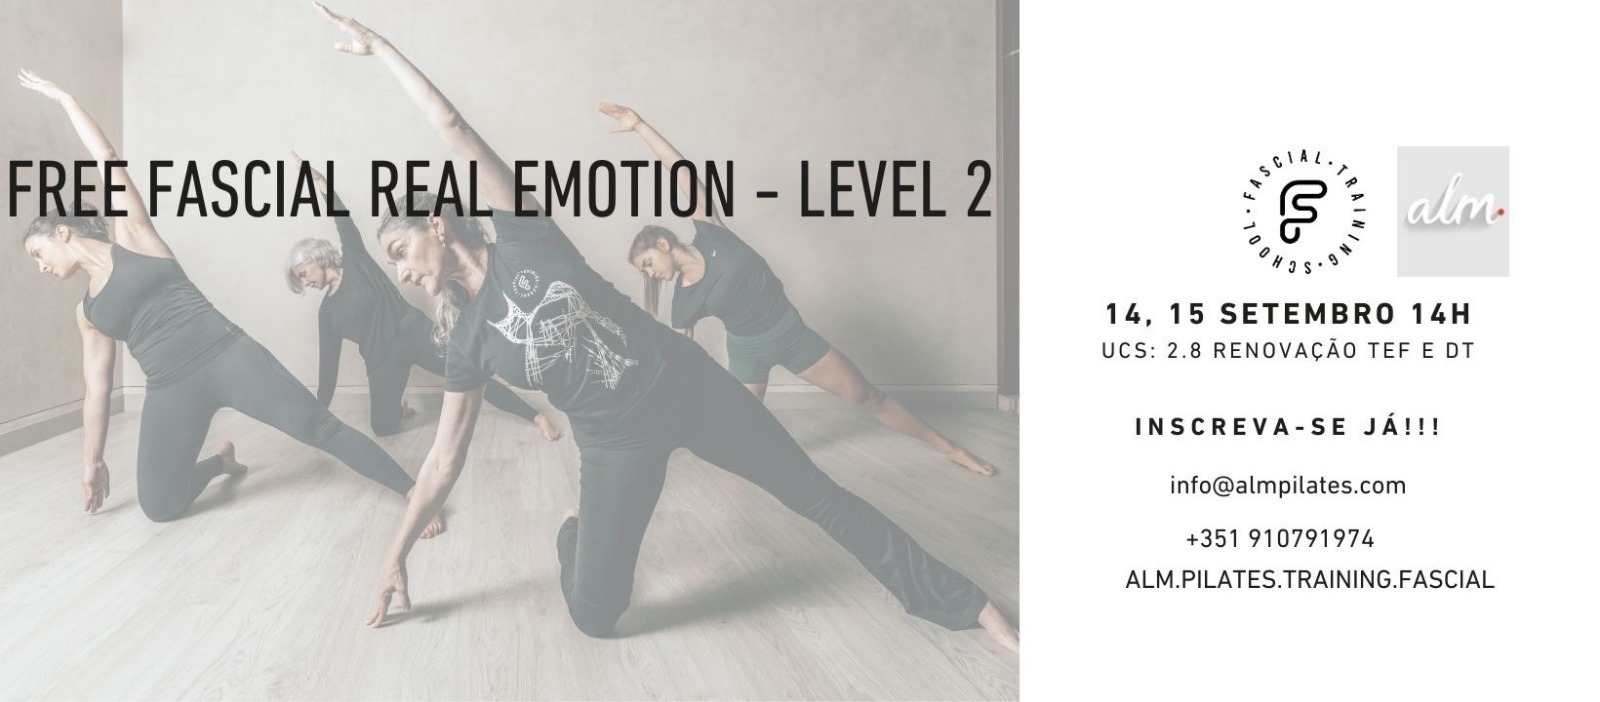 FREE Fascial Real Emotion Level 2